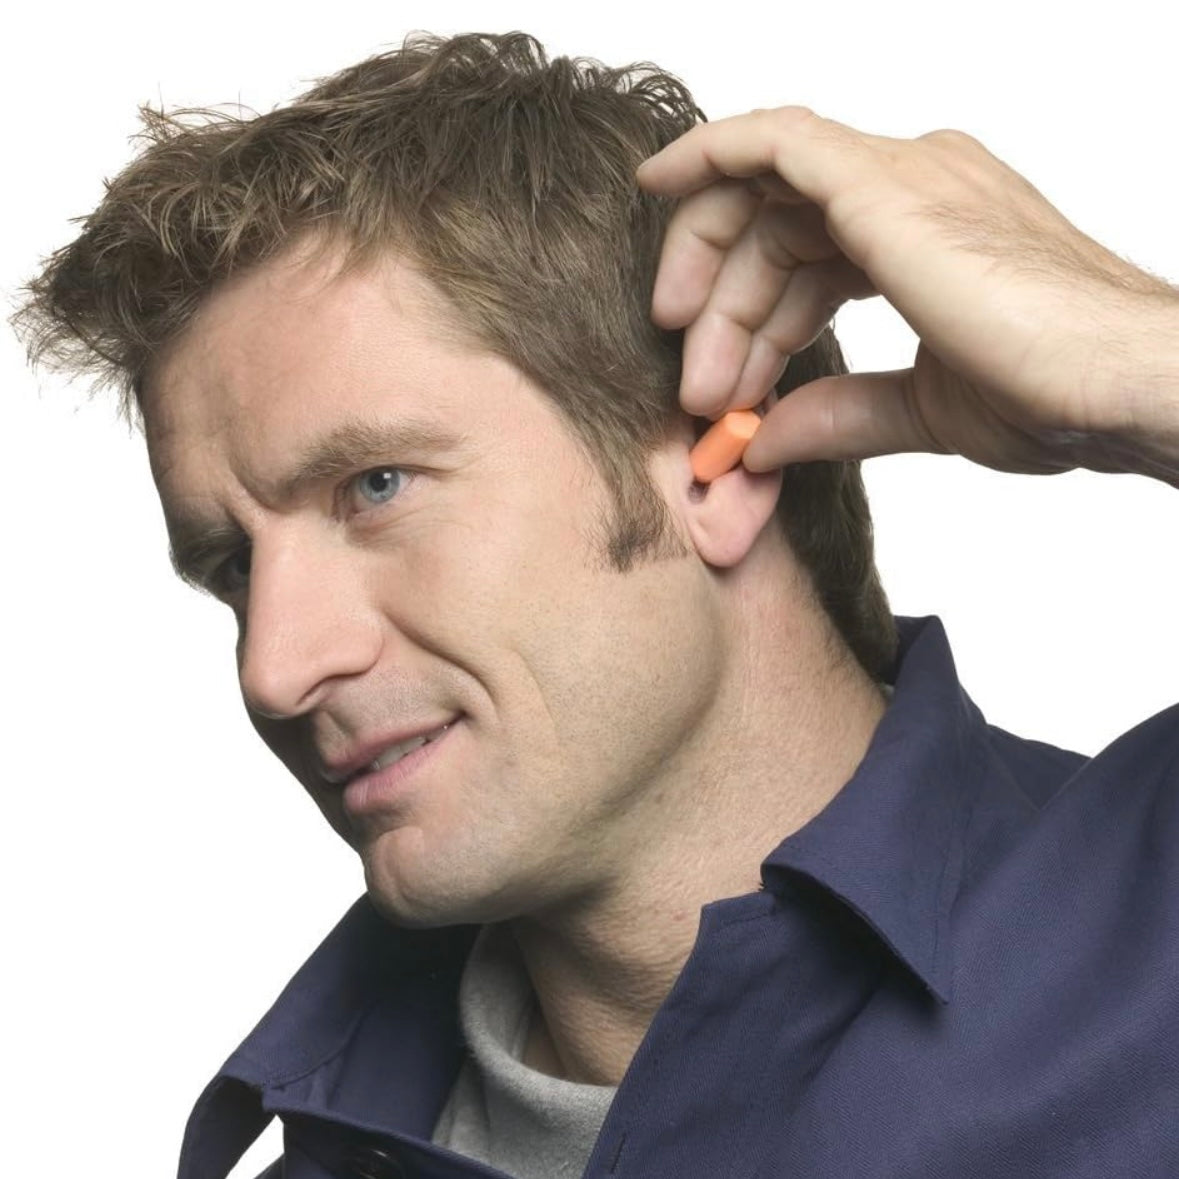 4 Sets of Earplugs With Case/ Attach to Keys or Wear on Neck - Block Out Loud Noises